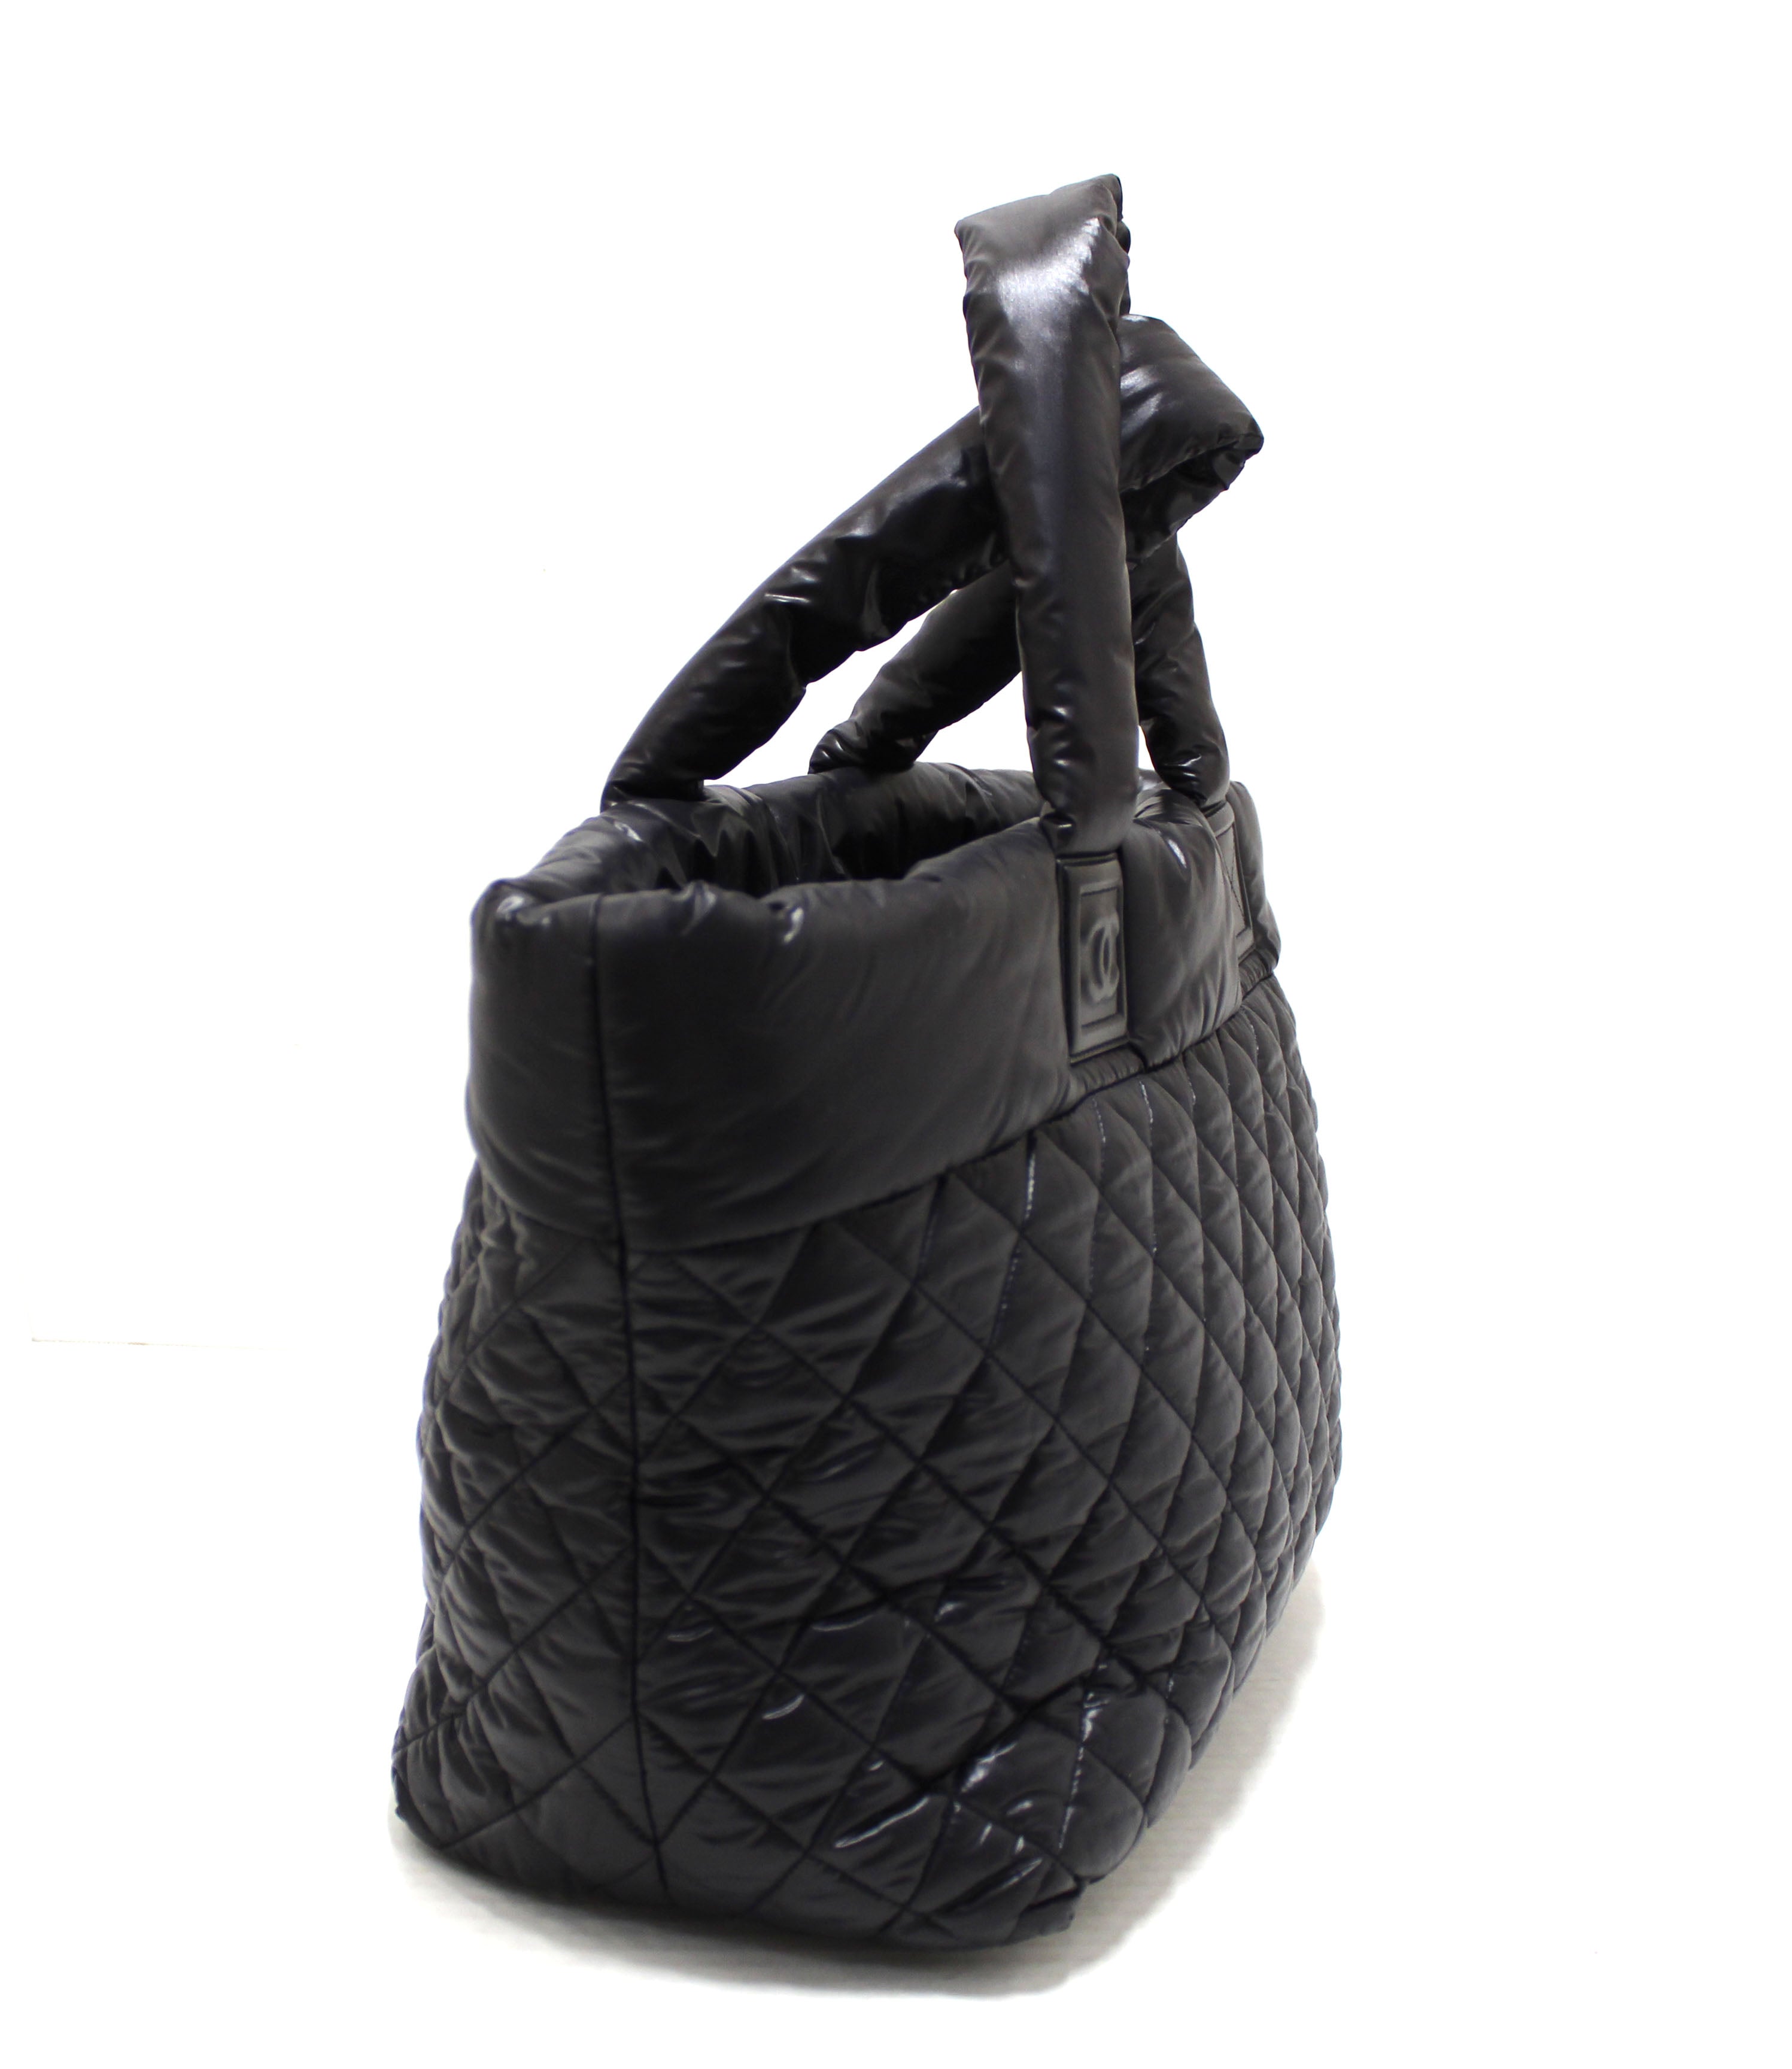 Chanel Coco Cocoon Black Quilted Nylon Reversible Tote – Italy Station